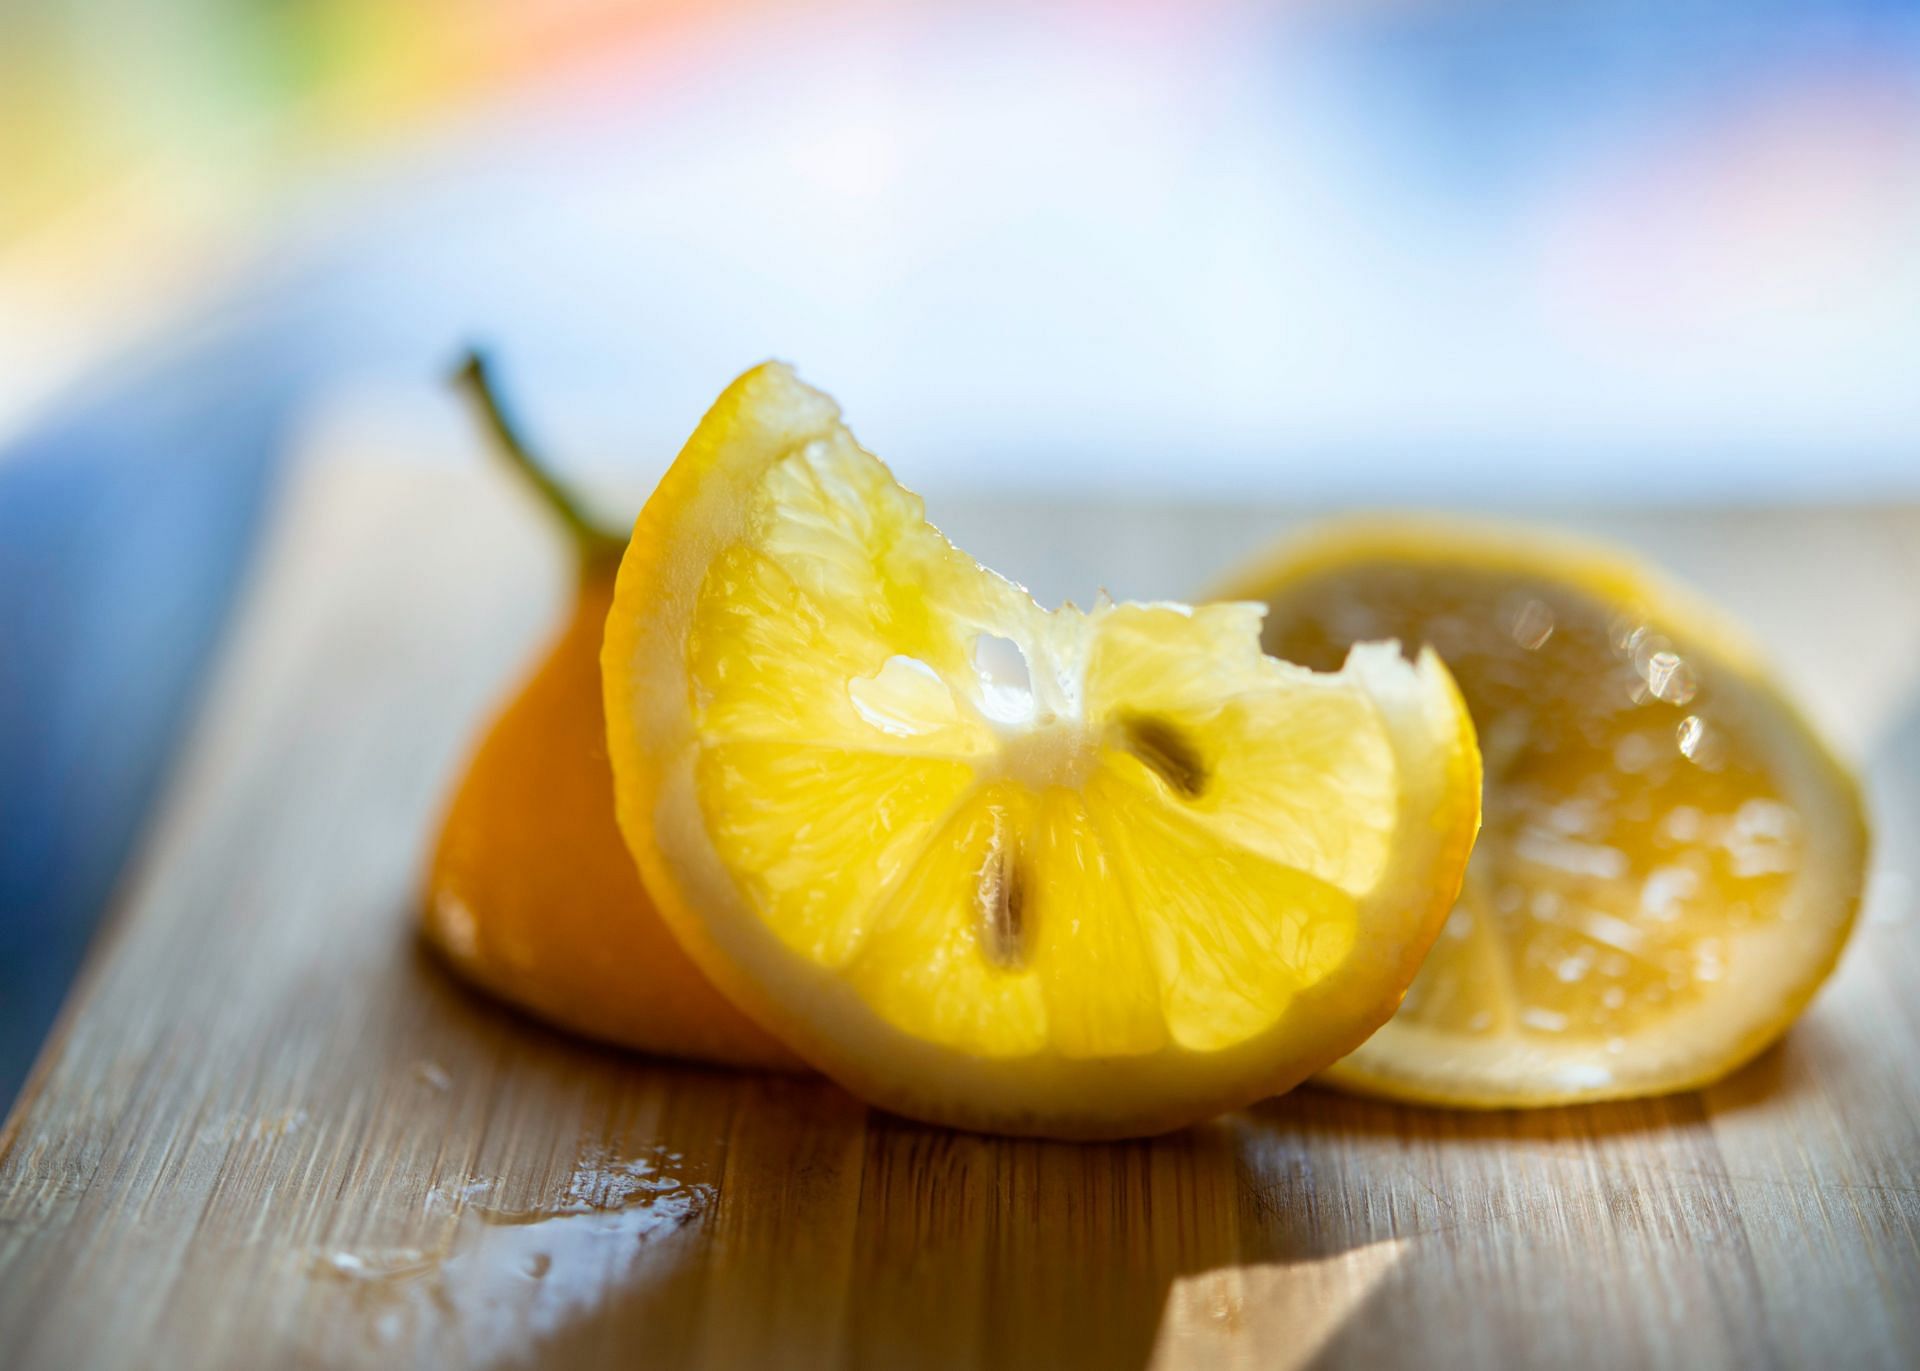 Lemon juice is mild and can be used for cooking. (Image via Unsplash/Cristina Anne Costello)